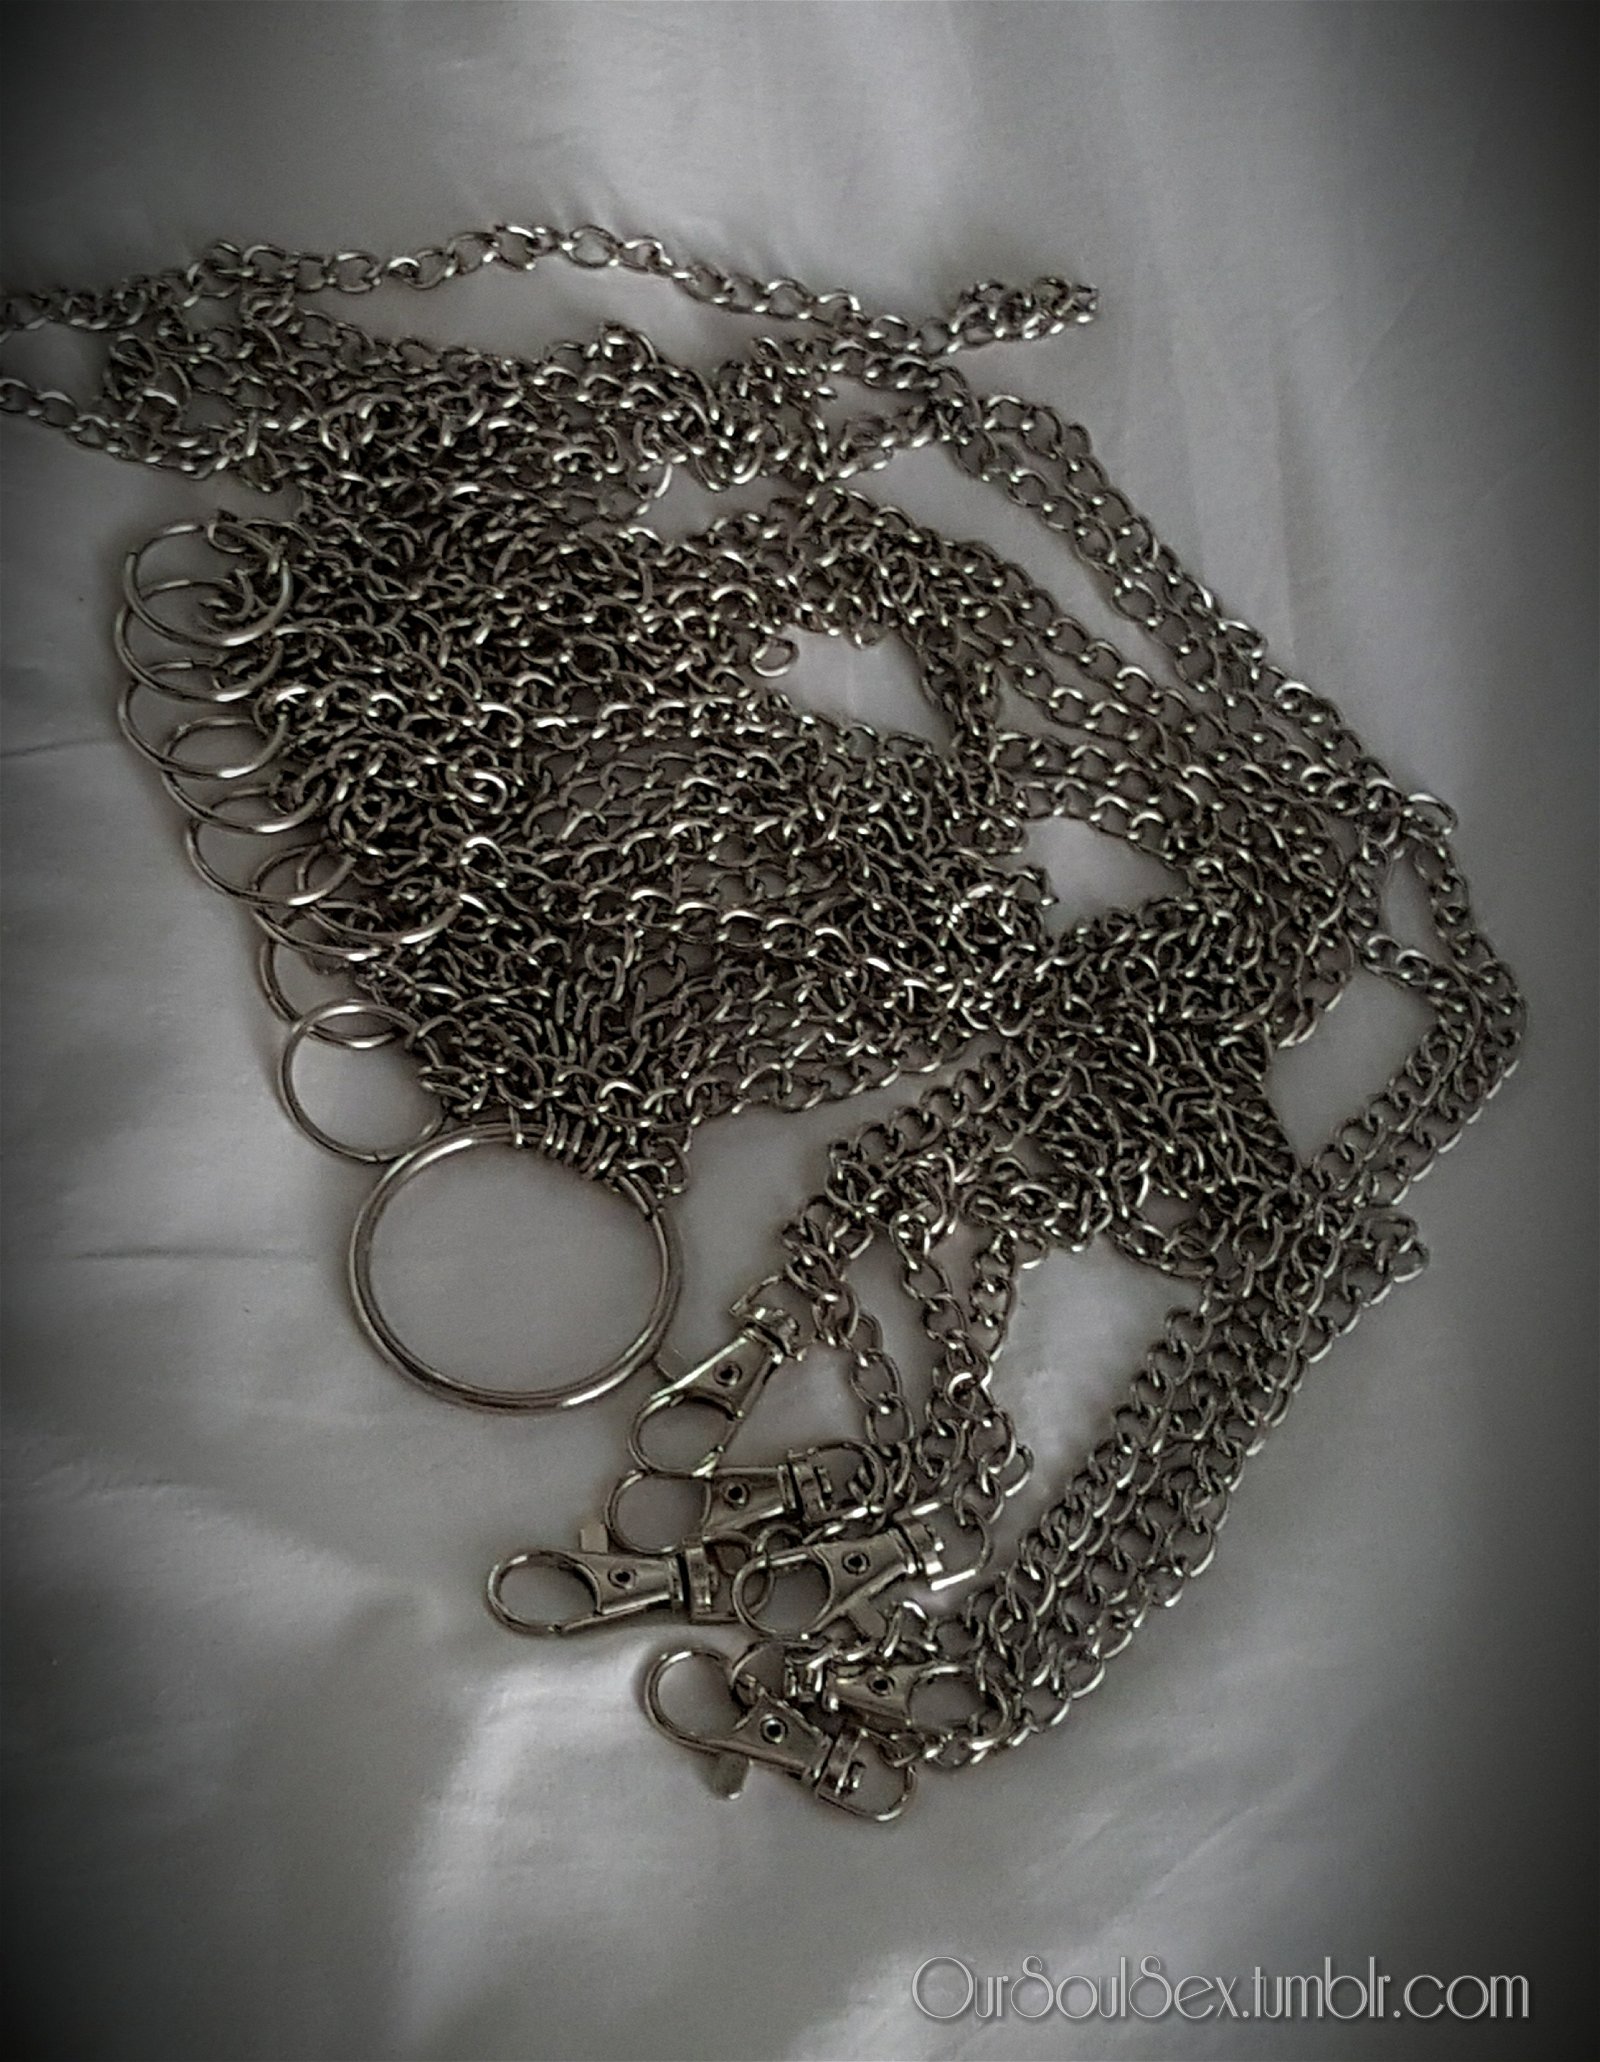 Watch the Photo by undefined with the username @undefined, posted on July 26, 2019. The post is about the topic Couples showing husband and wife. and the text says 'In Chains: 

Cory brought along a little errand for me on our trip to Hedo - a DIY chain body suit for me to put together and custom fit for her.   Here is the before & after shots.    It took more time than we thought, but let me just say ---- STUNNING!'